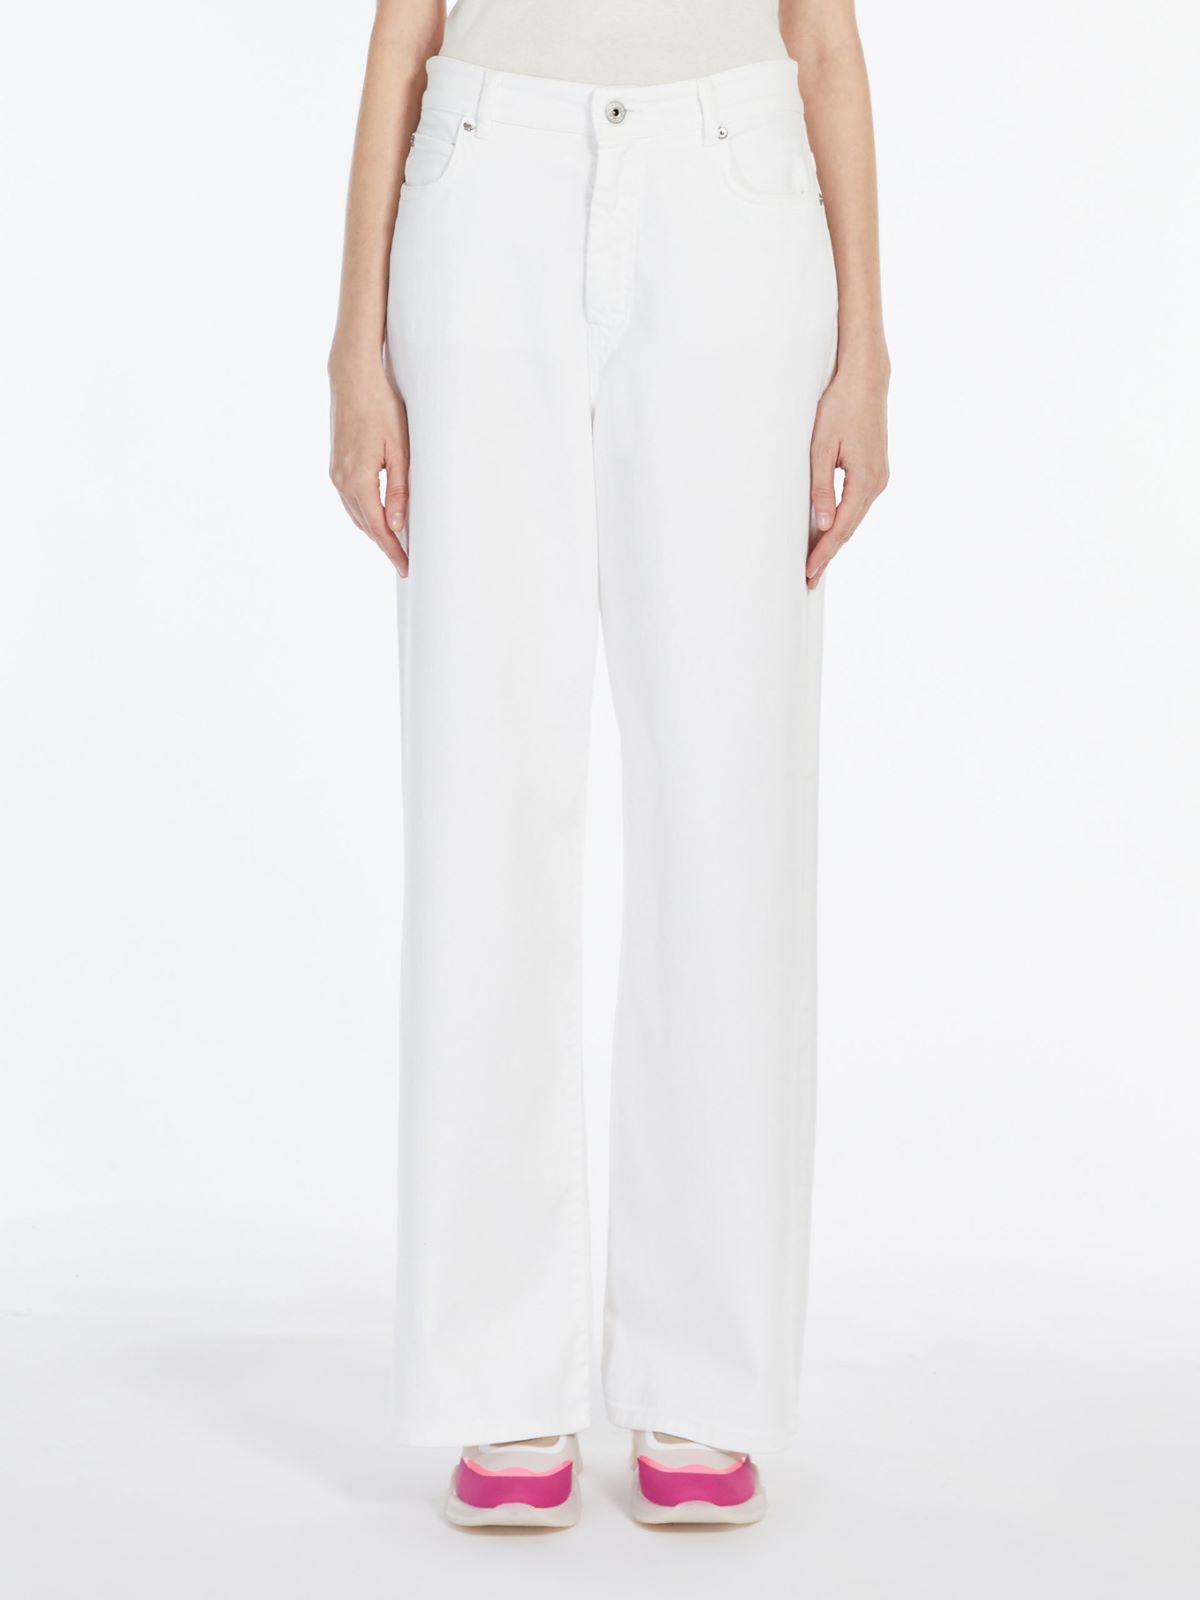 Stretch cotton trousers - WHITE - Weekend Max Mara - 2